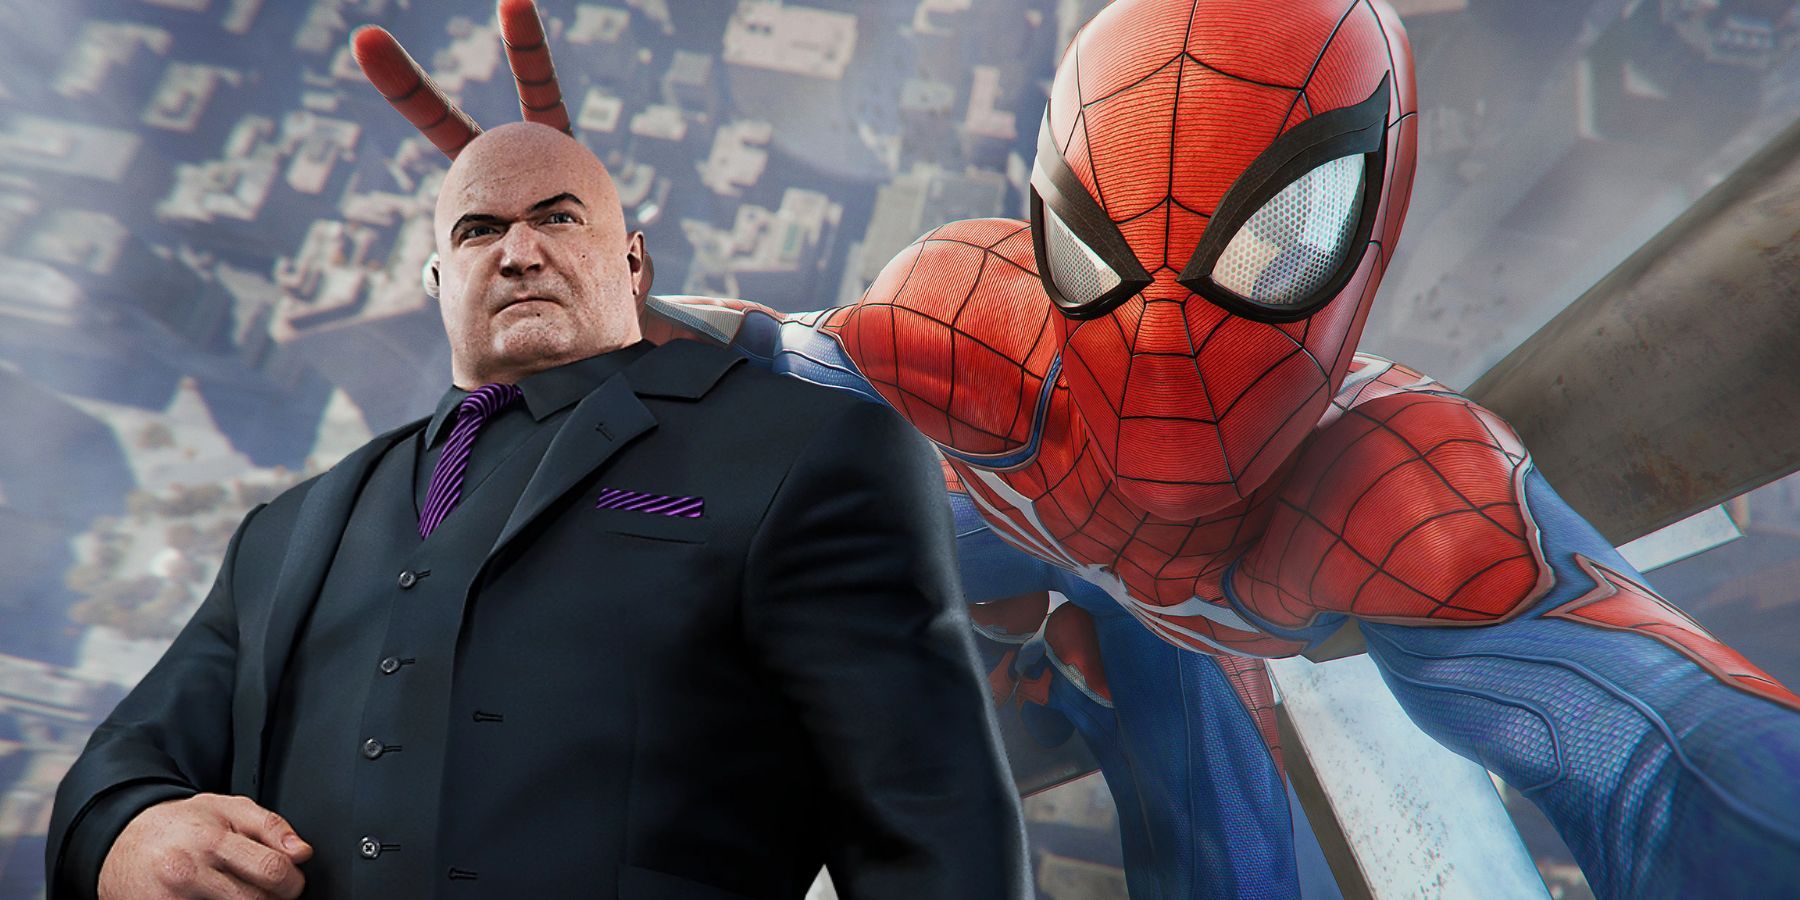 marvel’s spider-man 3 shouldn’t rule out a kingpin comeback